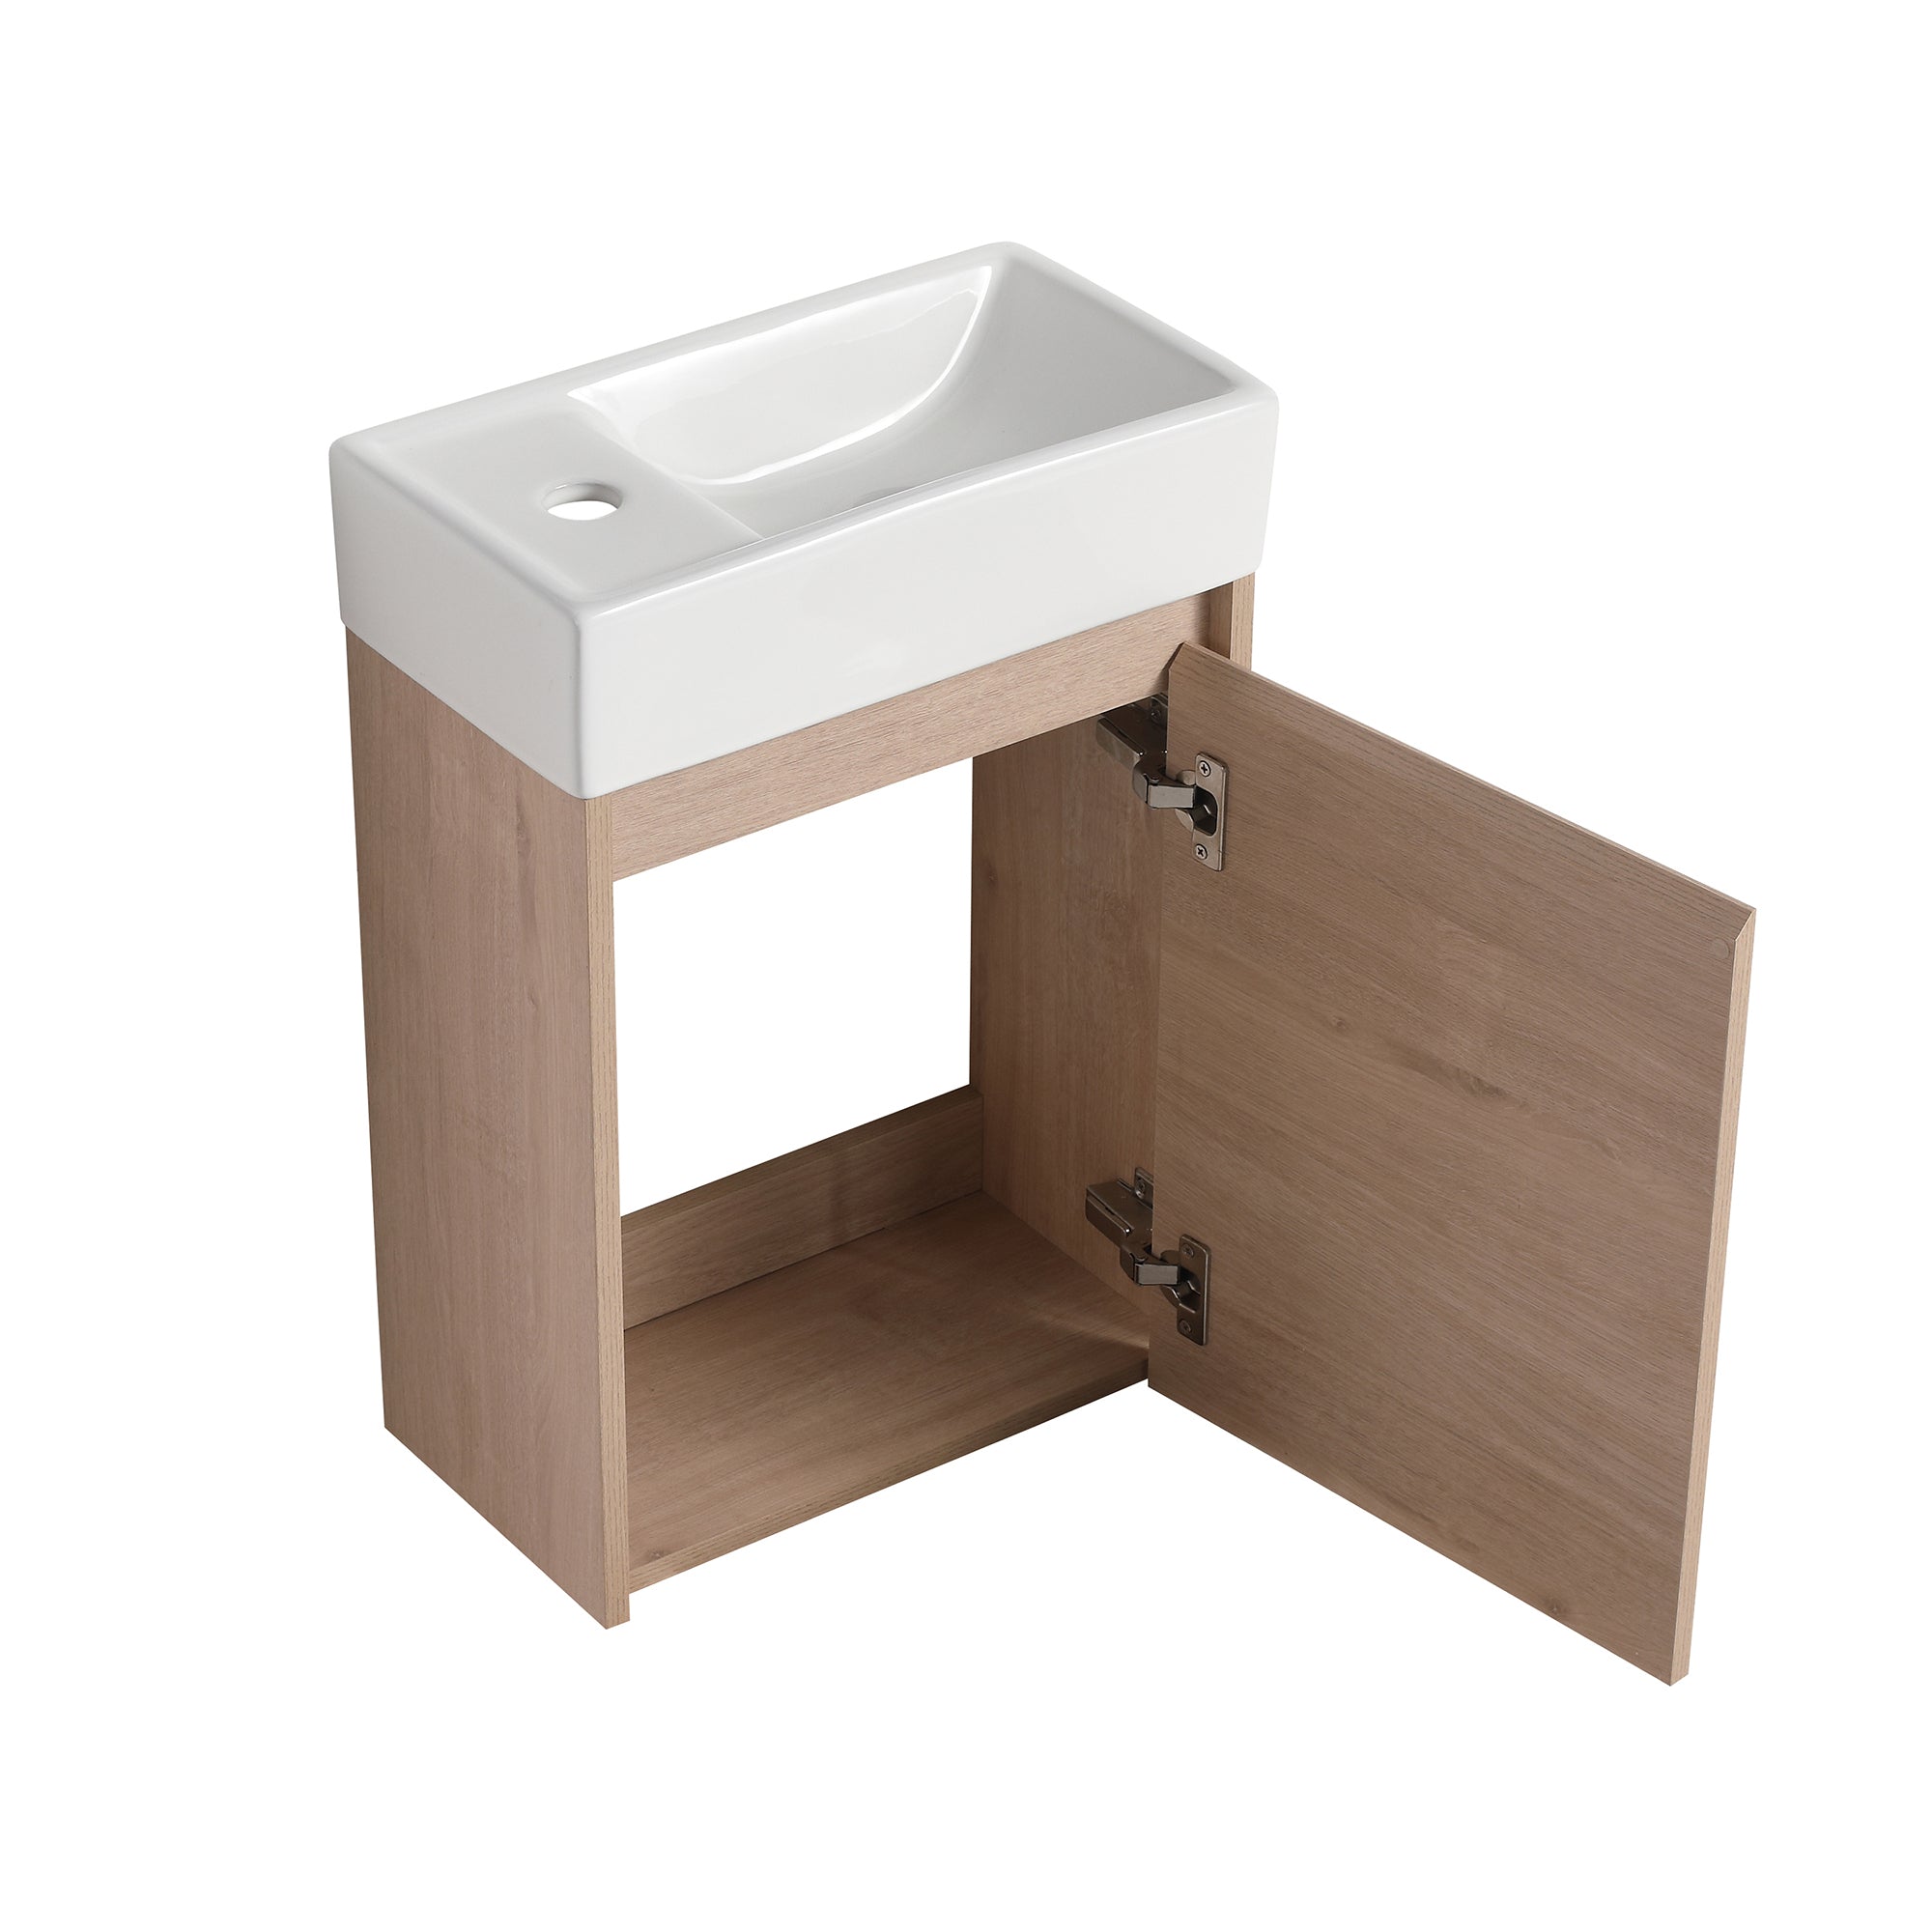 16 in. Plywood Wall Mounted Bathroom Vanity Set in Plain Light Oak with Integrated Ceramic Sink